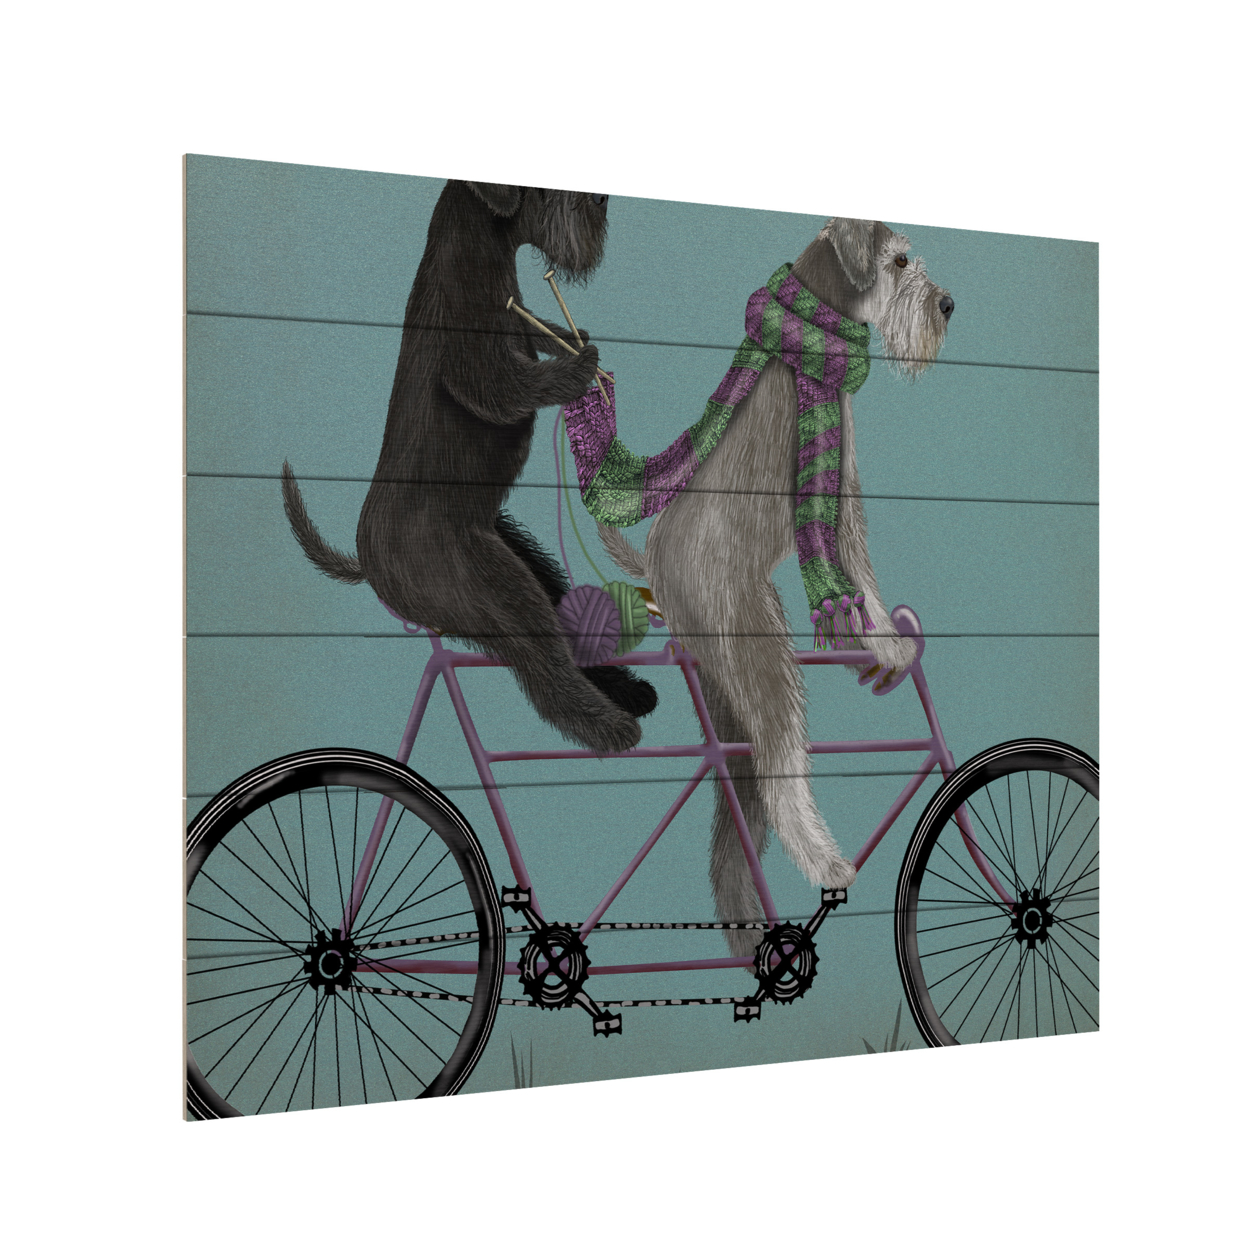 Wooden Slat Art 18 X 22 Inches Titled Schnauzer Tandem Ready To Hang Home Decor Picture